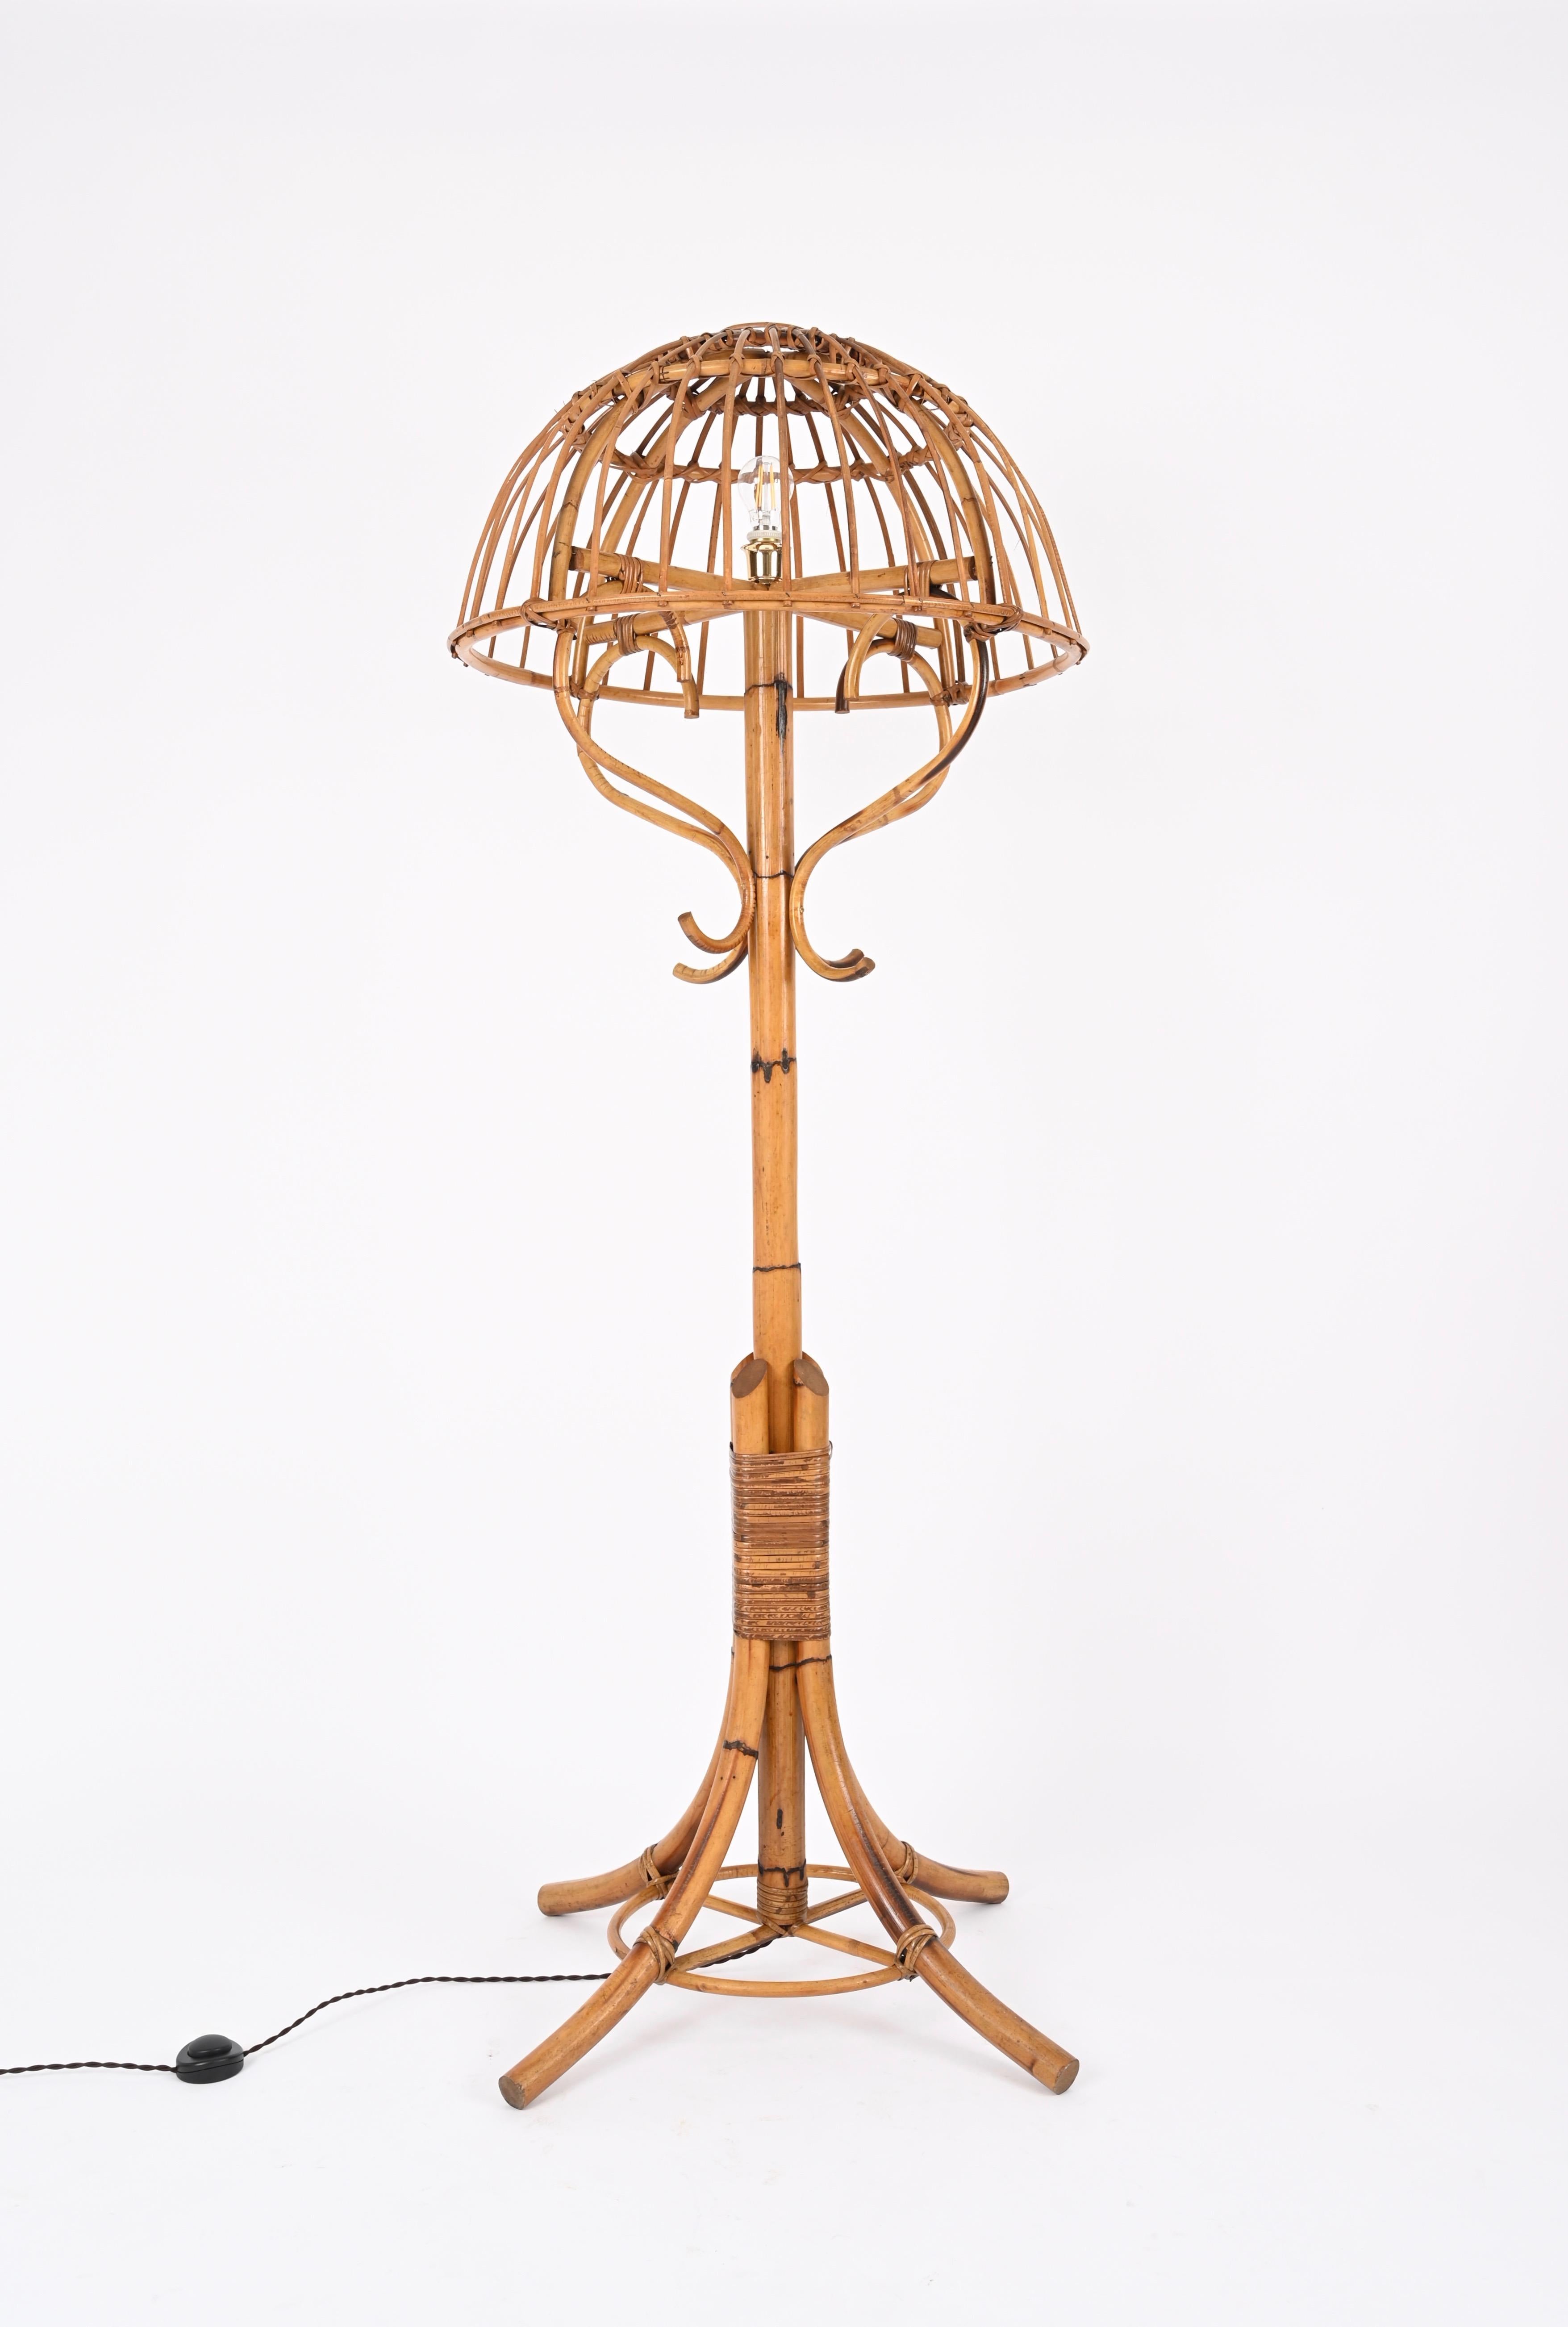 French Riviera Floor Lamp in Rattan, Wicker, Bamboo, Sognot Style, Italy 1960s For Sale 4